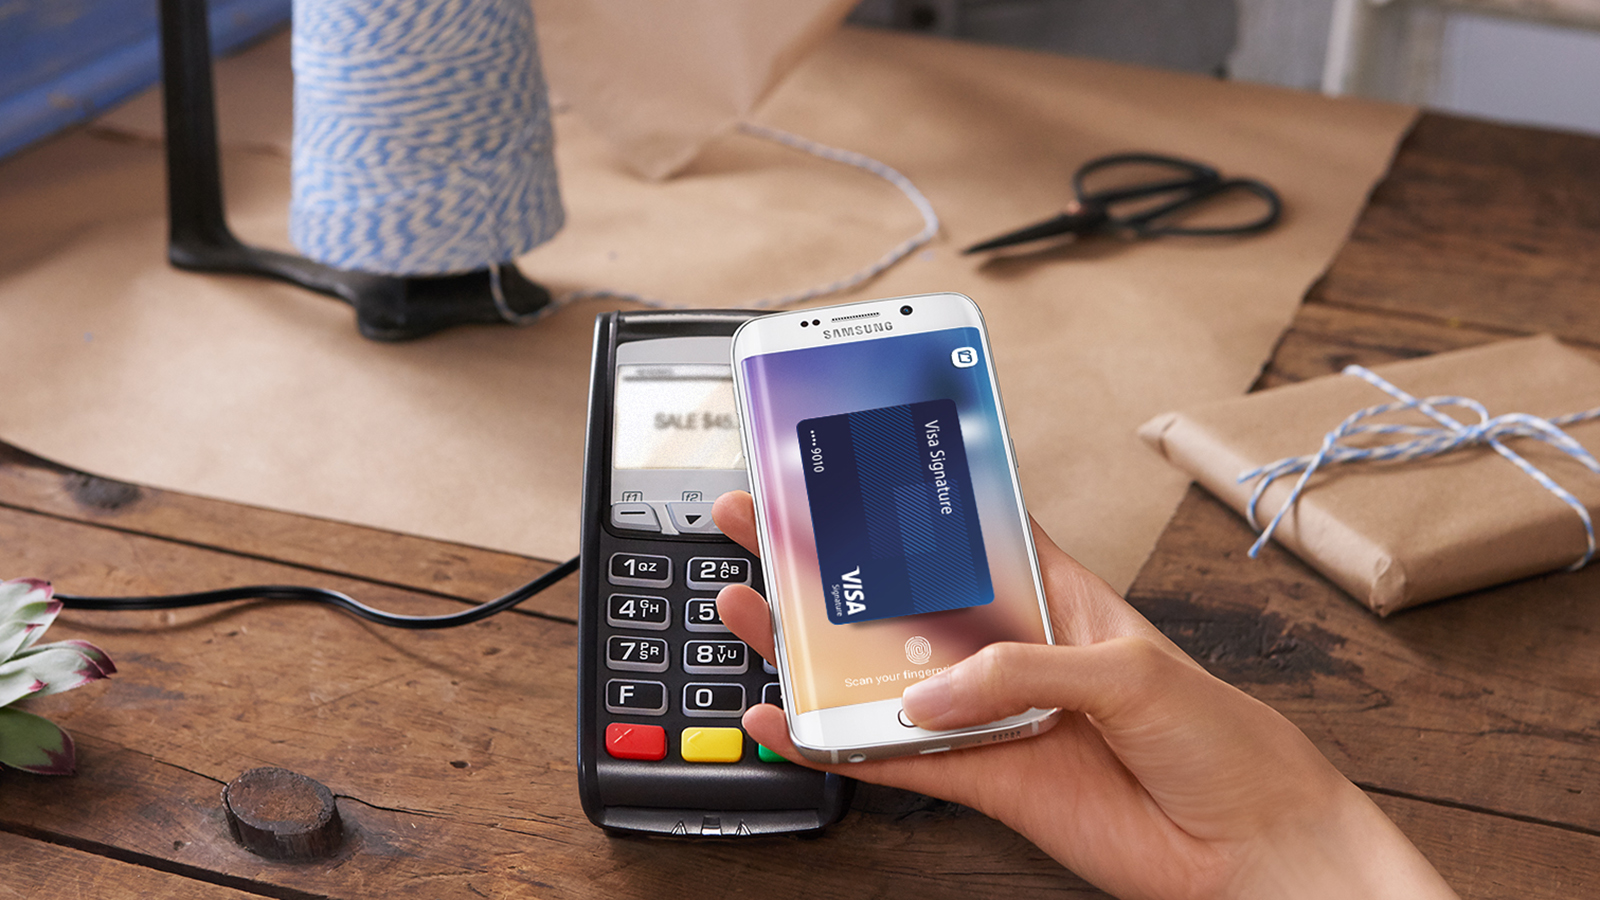 A hand holding a mobile phone over a POS device making a Samsung Pay payment.